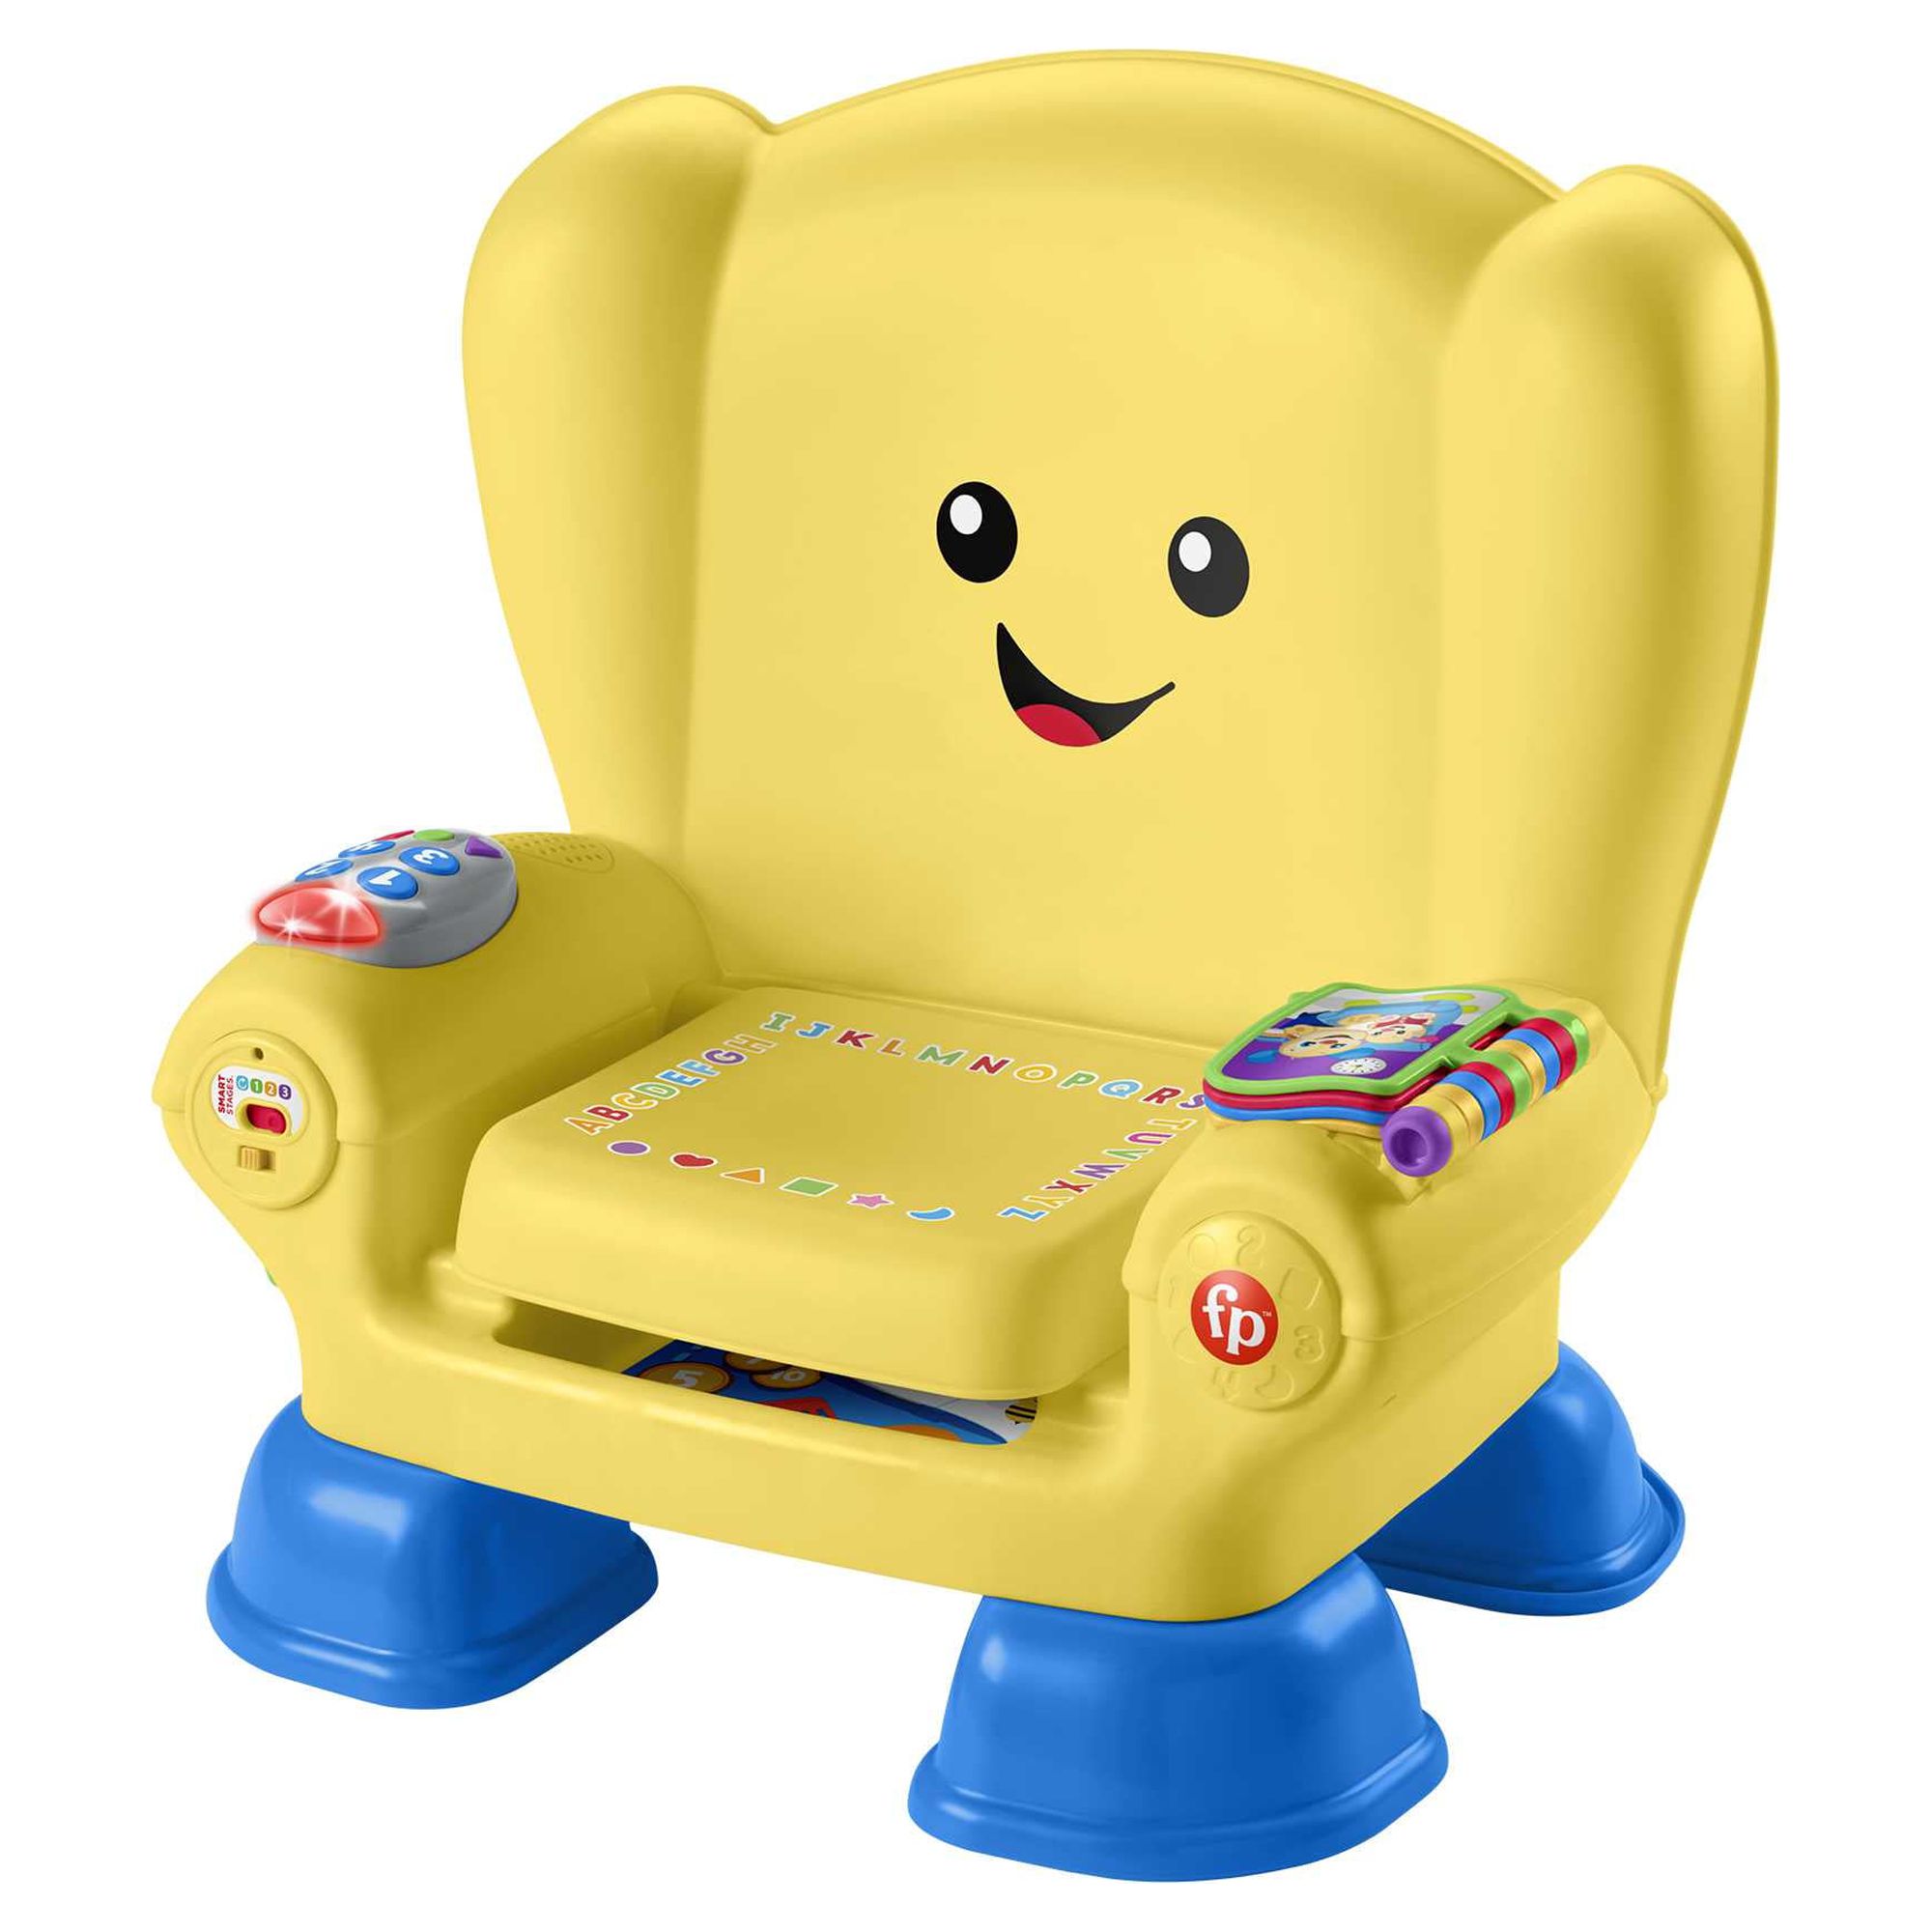 Fisher-Price Laugh & Learn Smart Stages Chair Electronic Learning Toy for Toddlers, Yellow - image 1 of 7